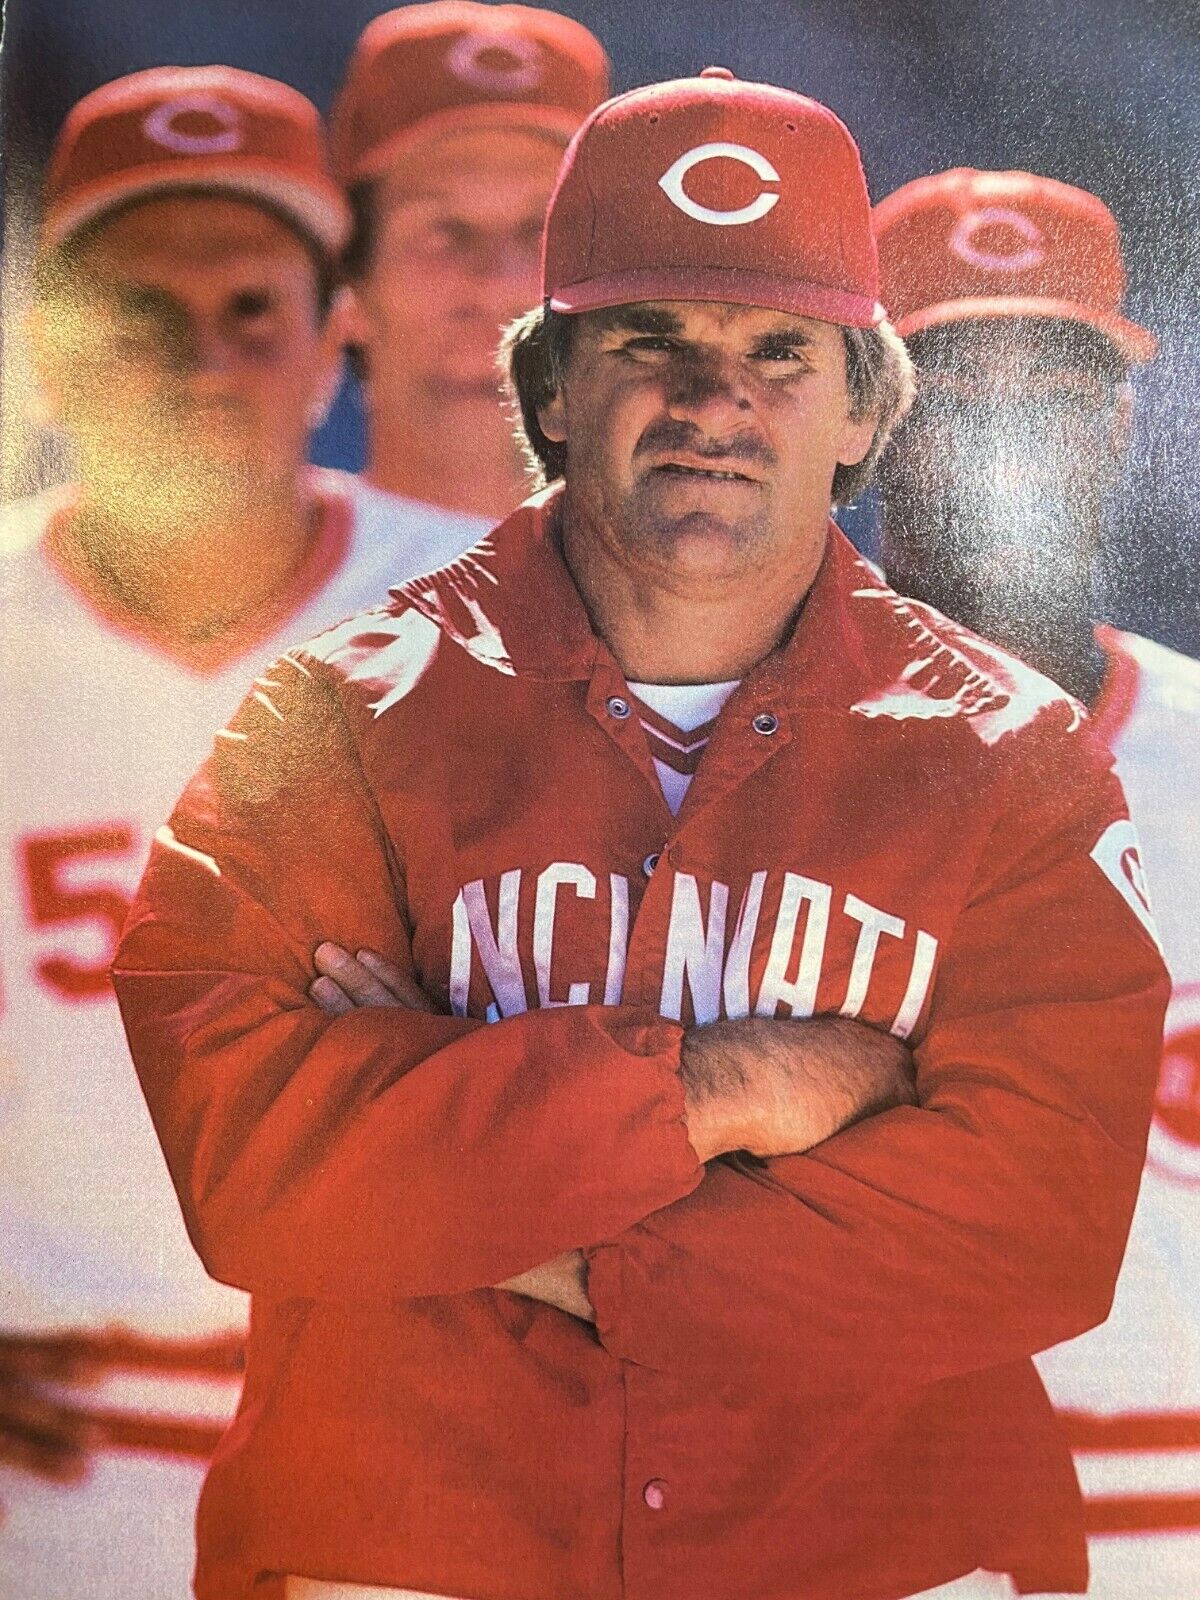 1985 Baseball Player Pete Rose As A Manager illustrated